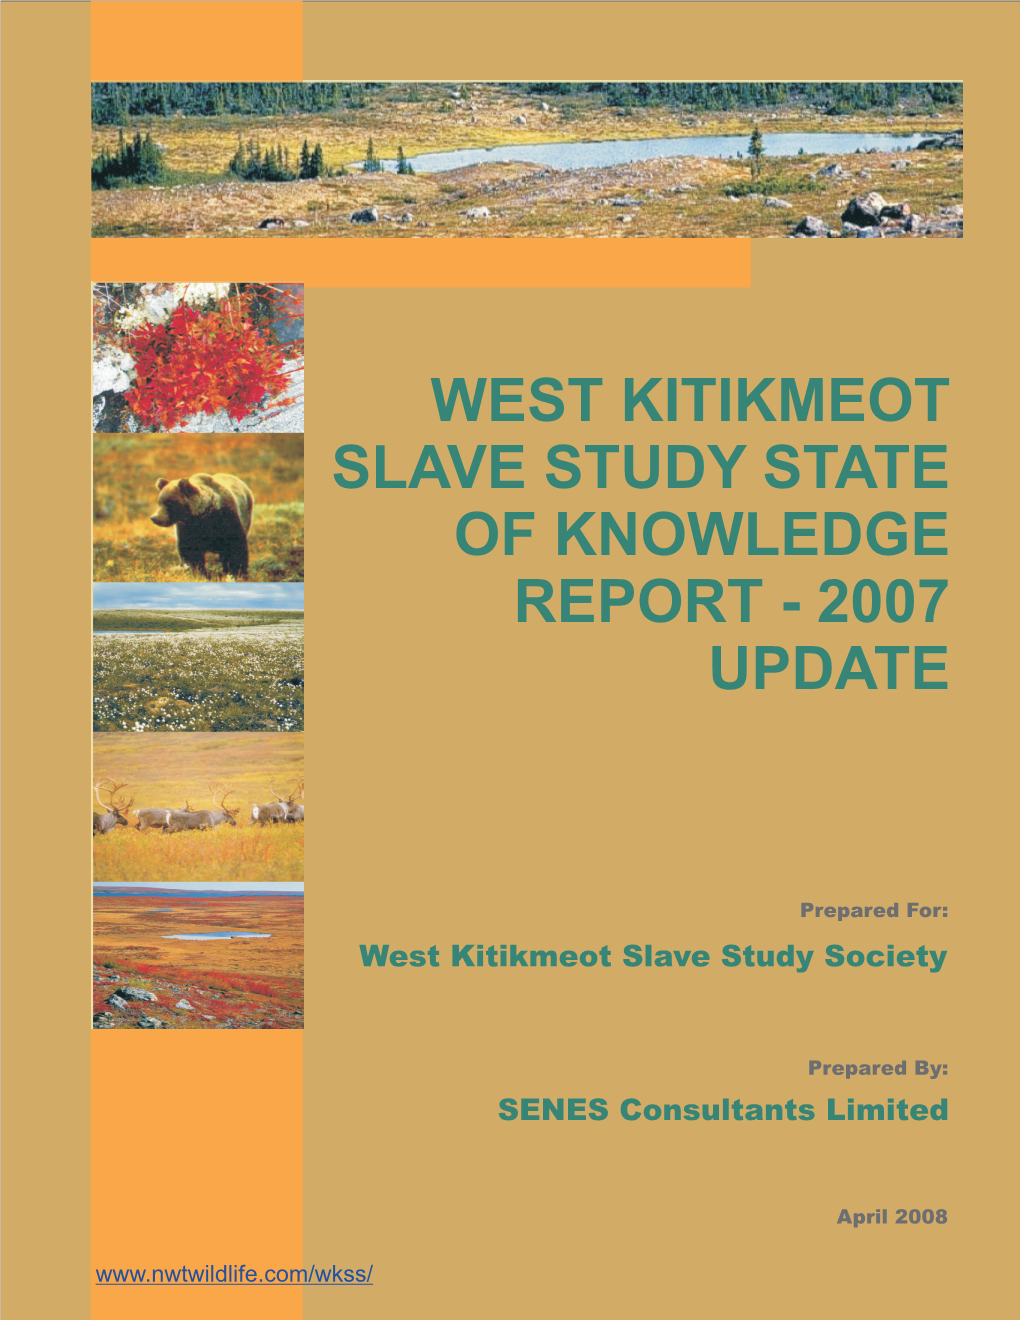 West Kitikmeot Slave Study State of Knowledge Report - 2007 Update